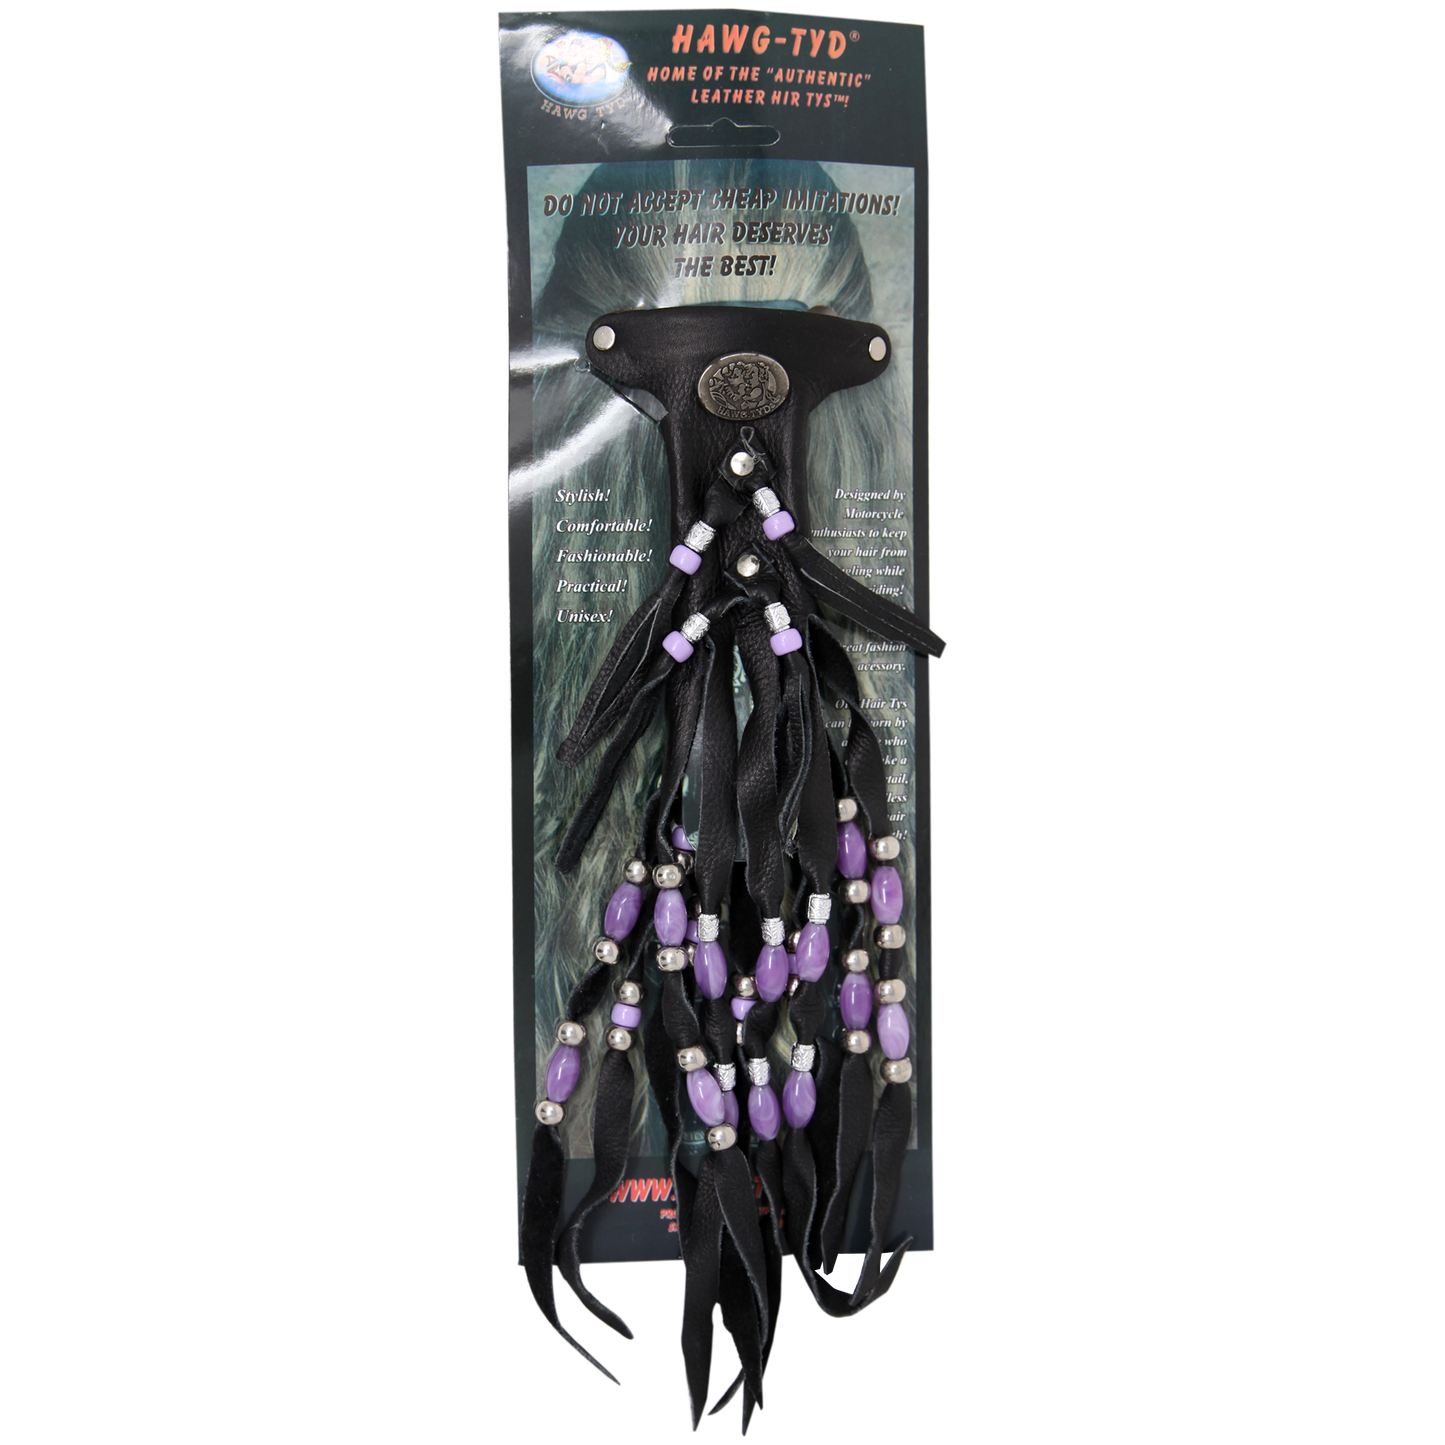 HTPurple "Hawg Tyd" The Authentic Leather Hair TYS - Purple Beads